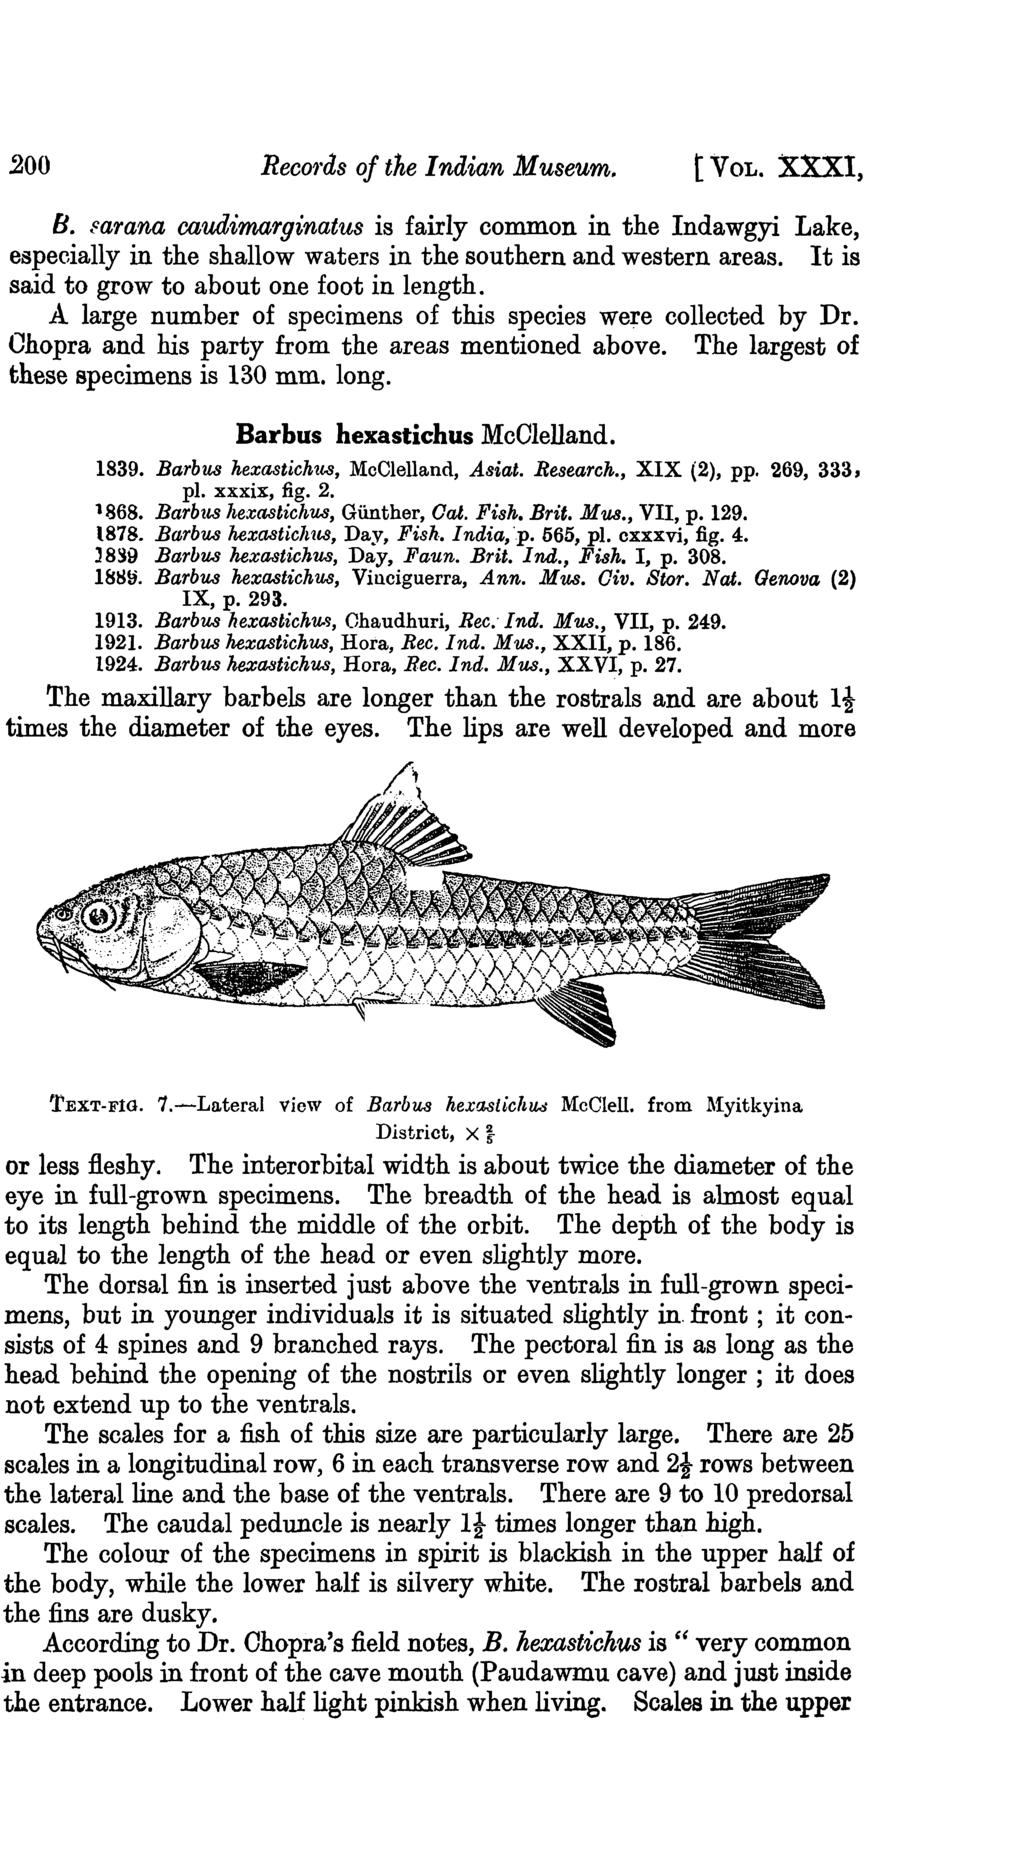 200 ReCOfds of the Indian Museum. tvol. XXXI, B. ~arana caudimarginatus is fairly common in the Indawgyi Lake, especially in the shallow waters in the southern and western areas.